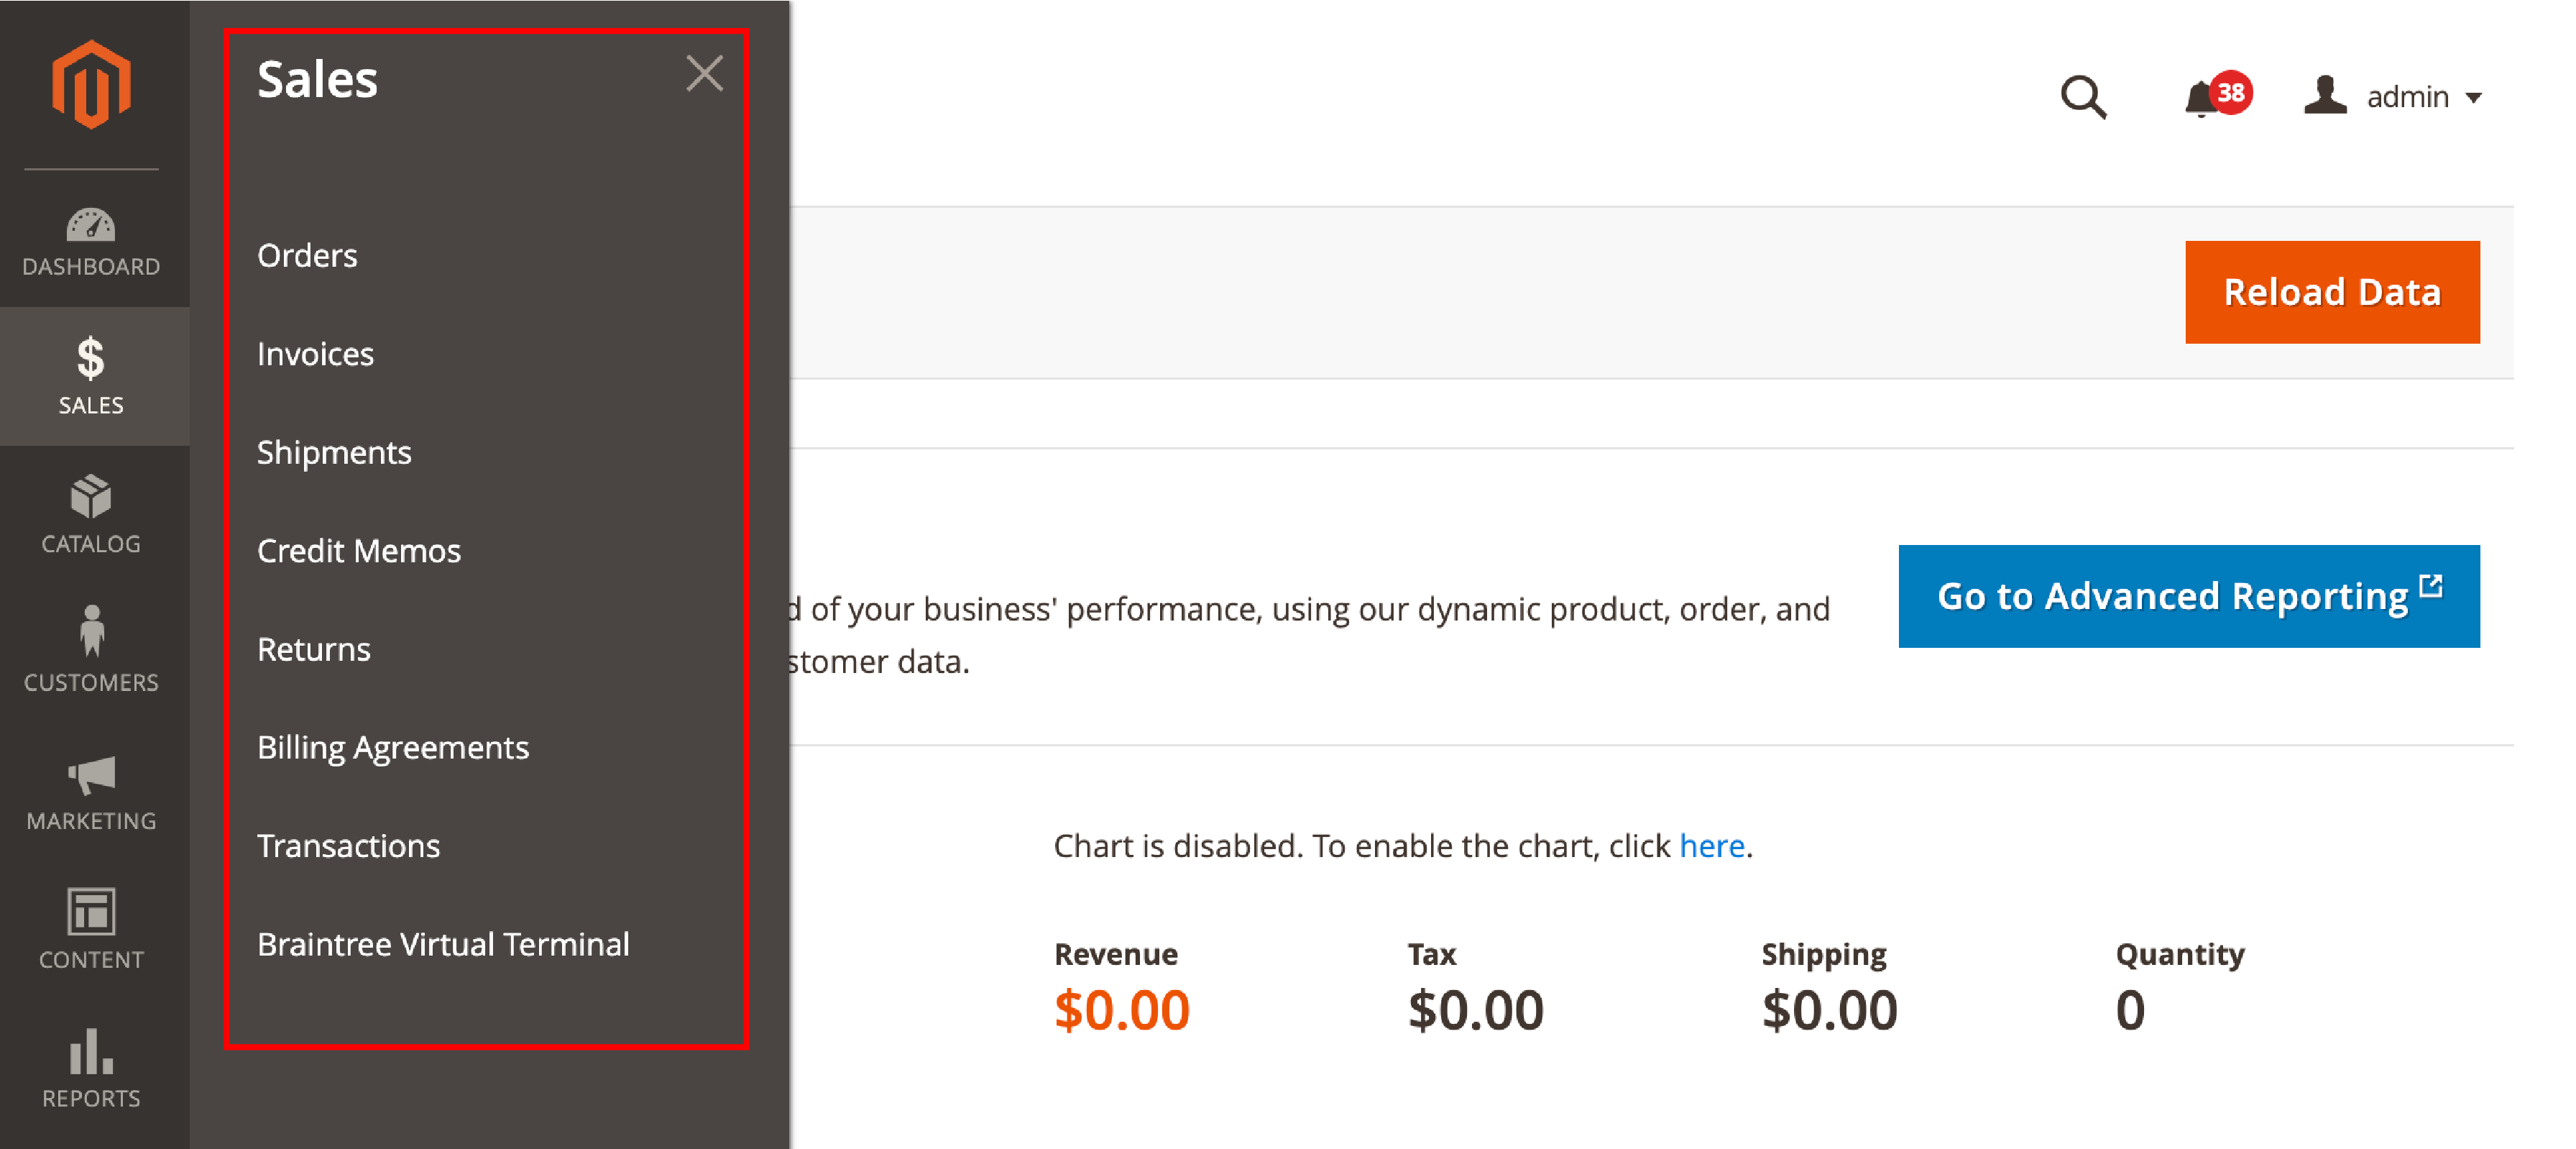 Magento Sales Tab with options for managing invoices, shipments, and printing shipping labels